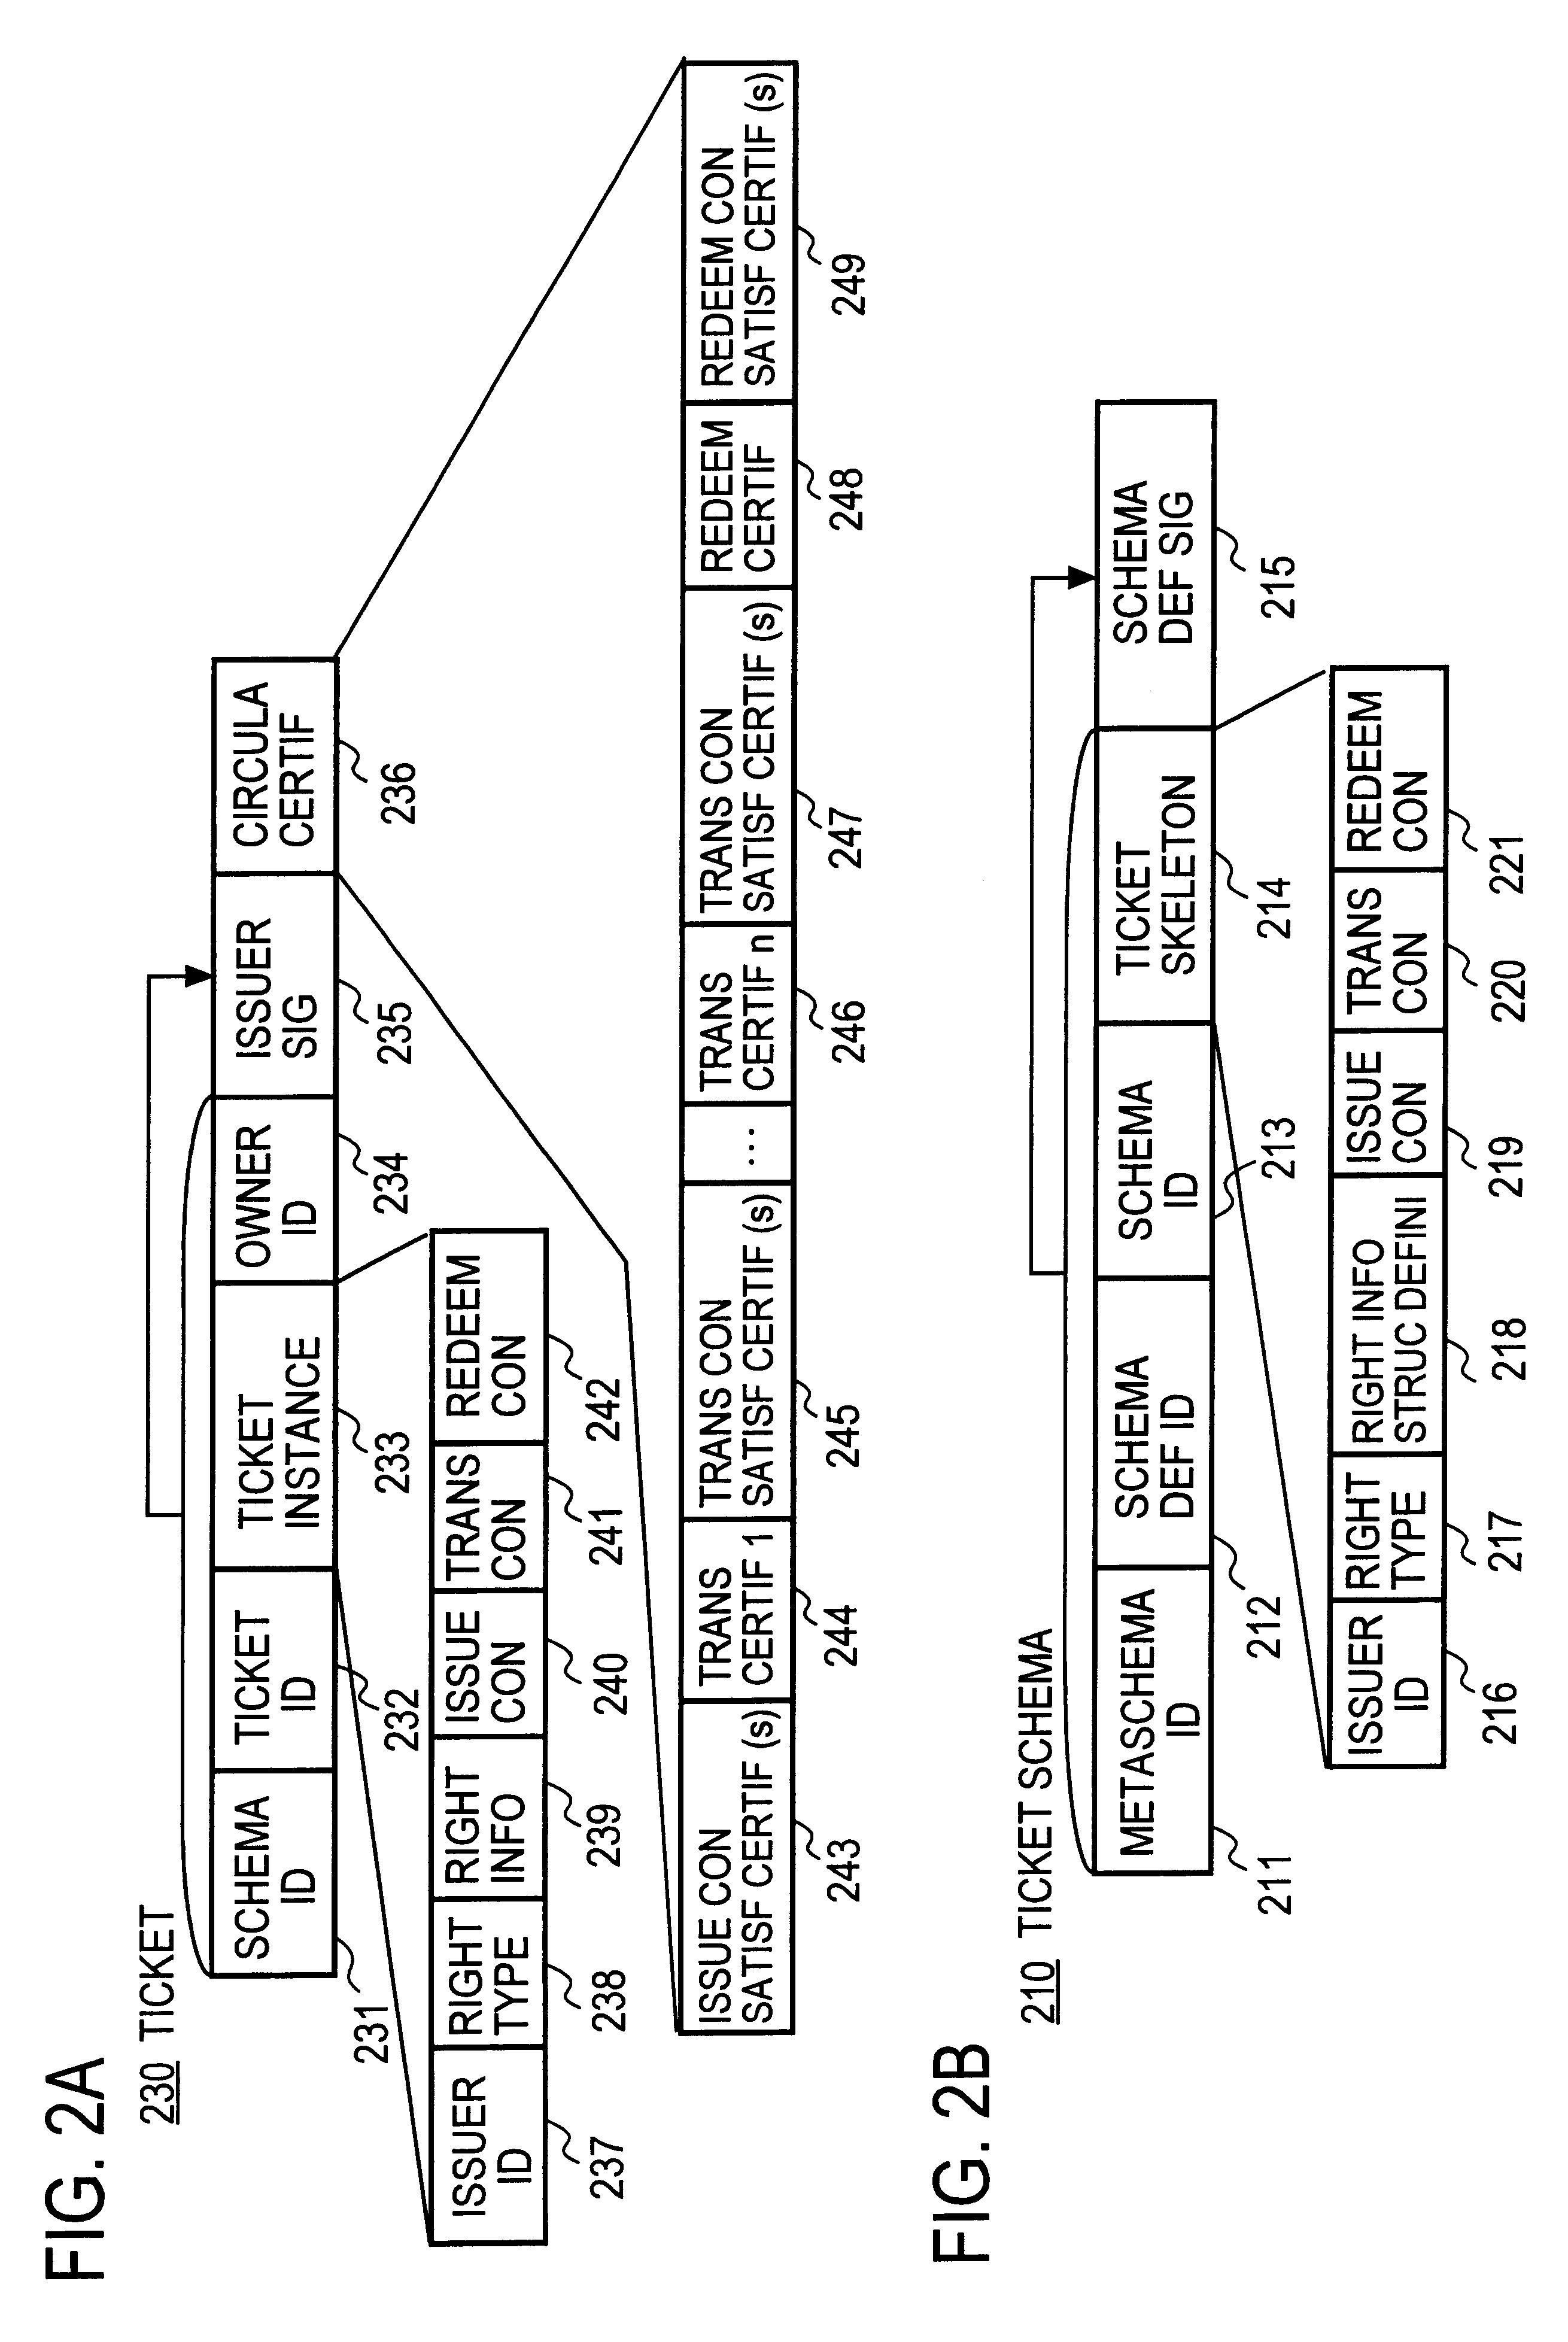 Recording medium with electronic ticket definitions recorded thereon and electronic ticket processing methods and apparatuses